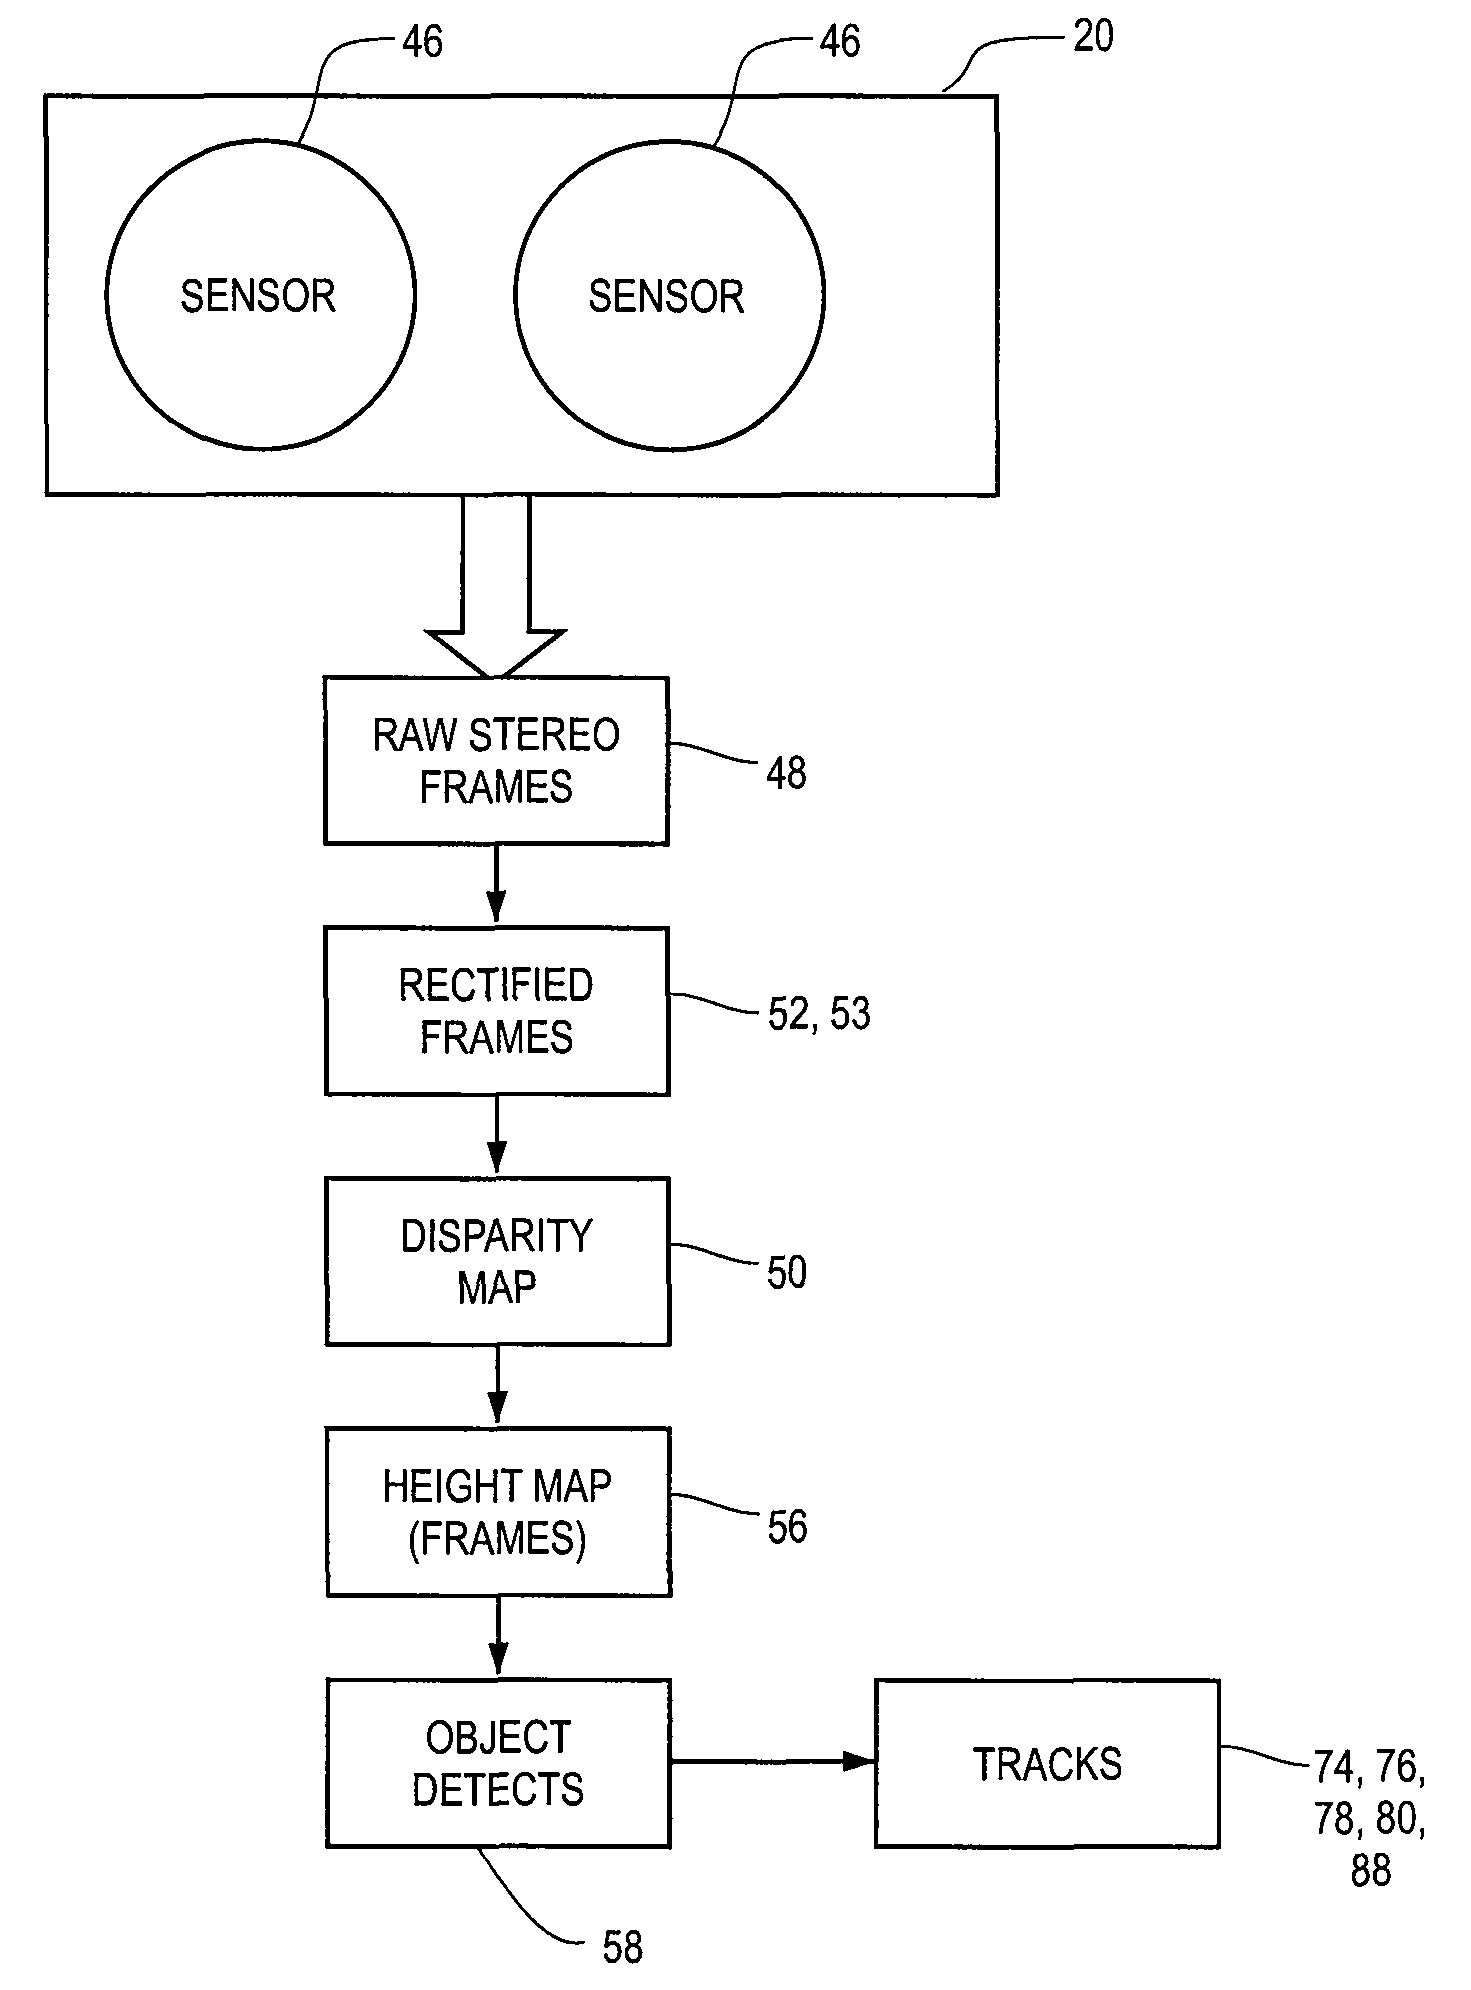 System and process for detecting, tracking and counting human objects of interest